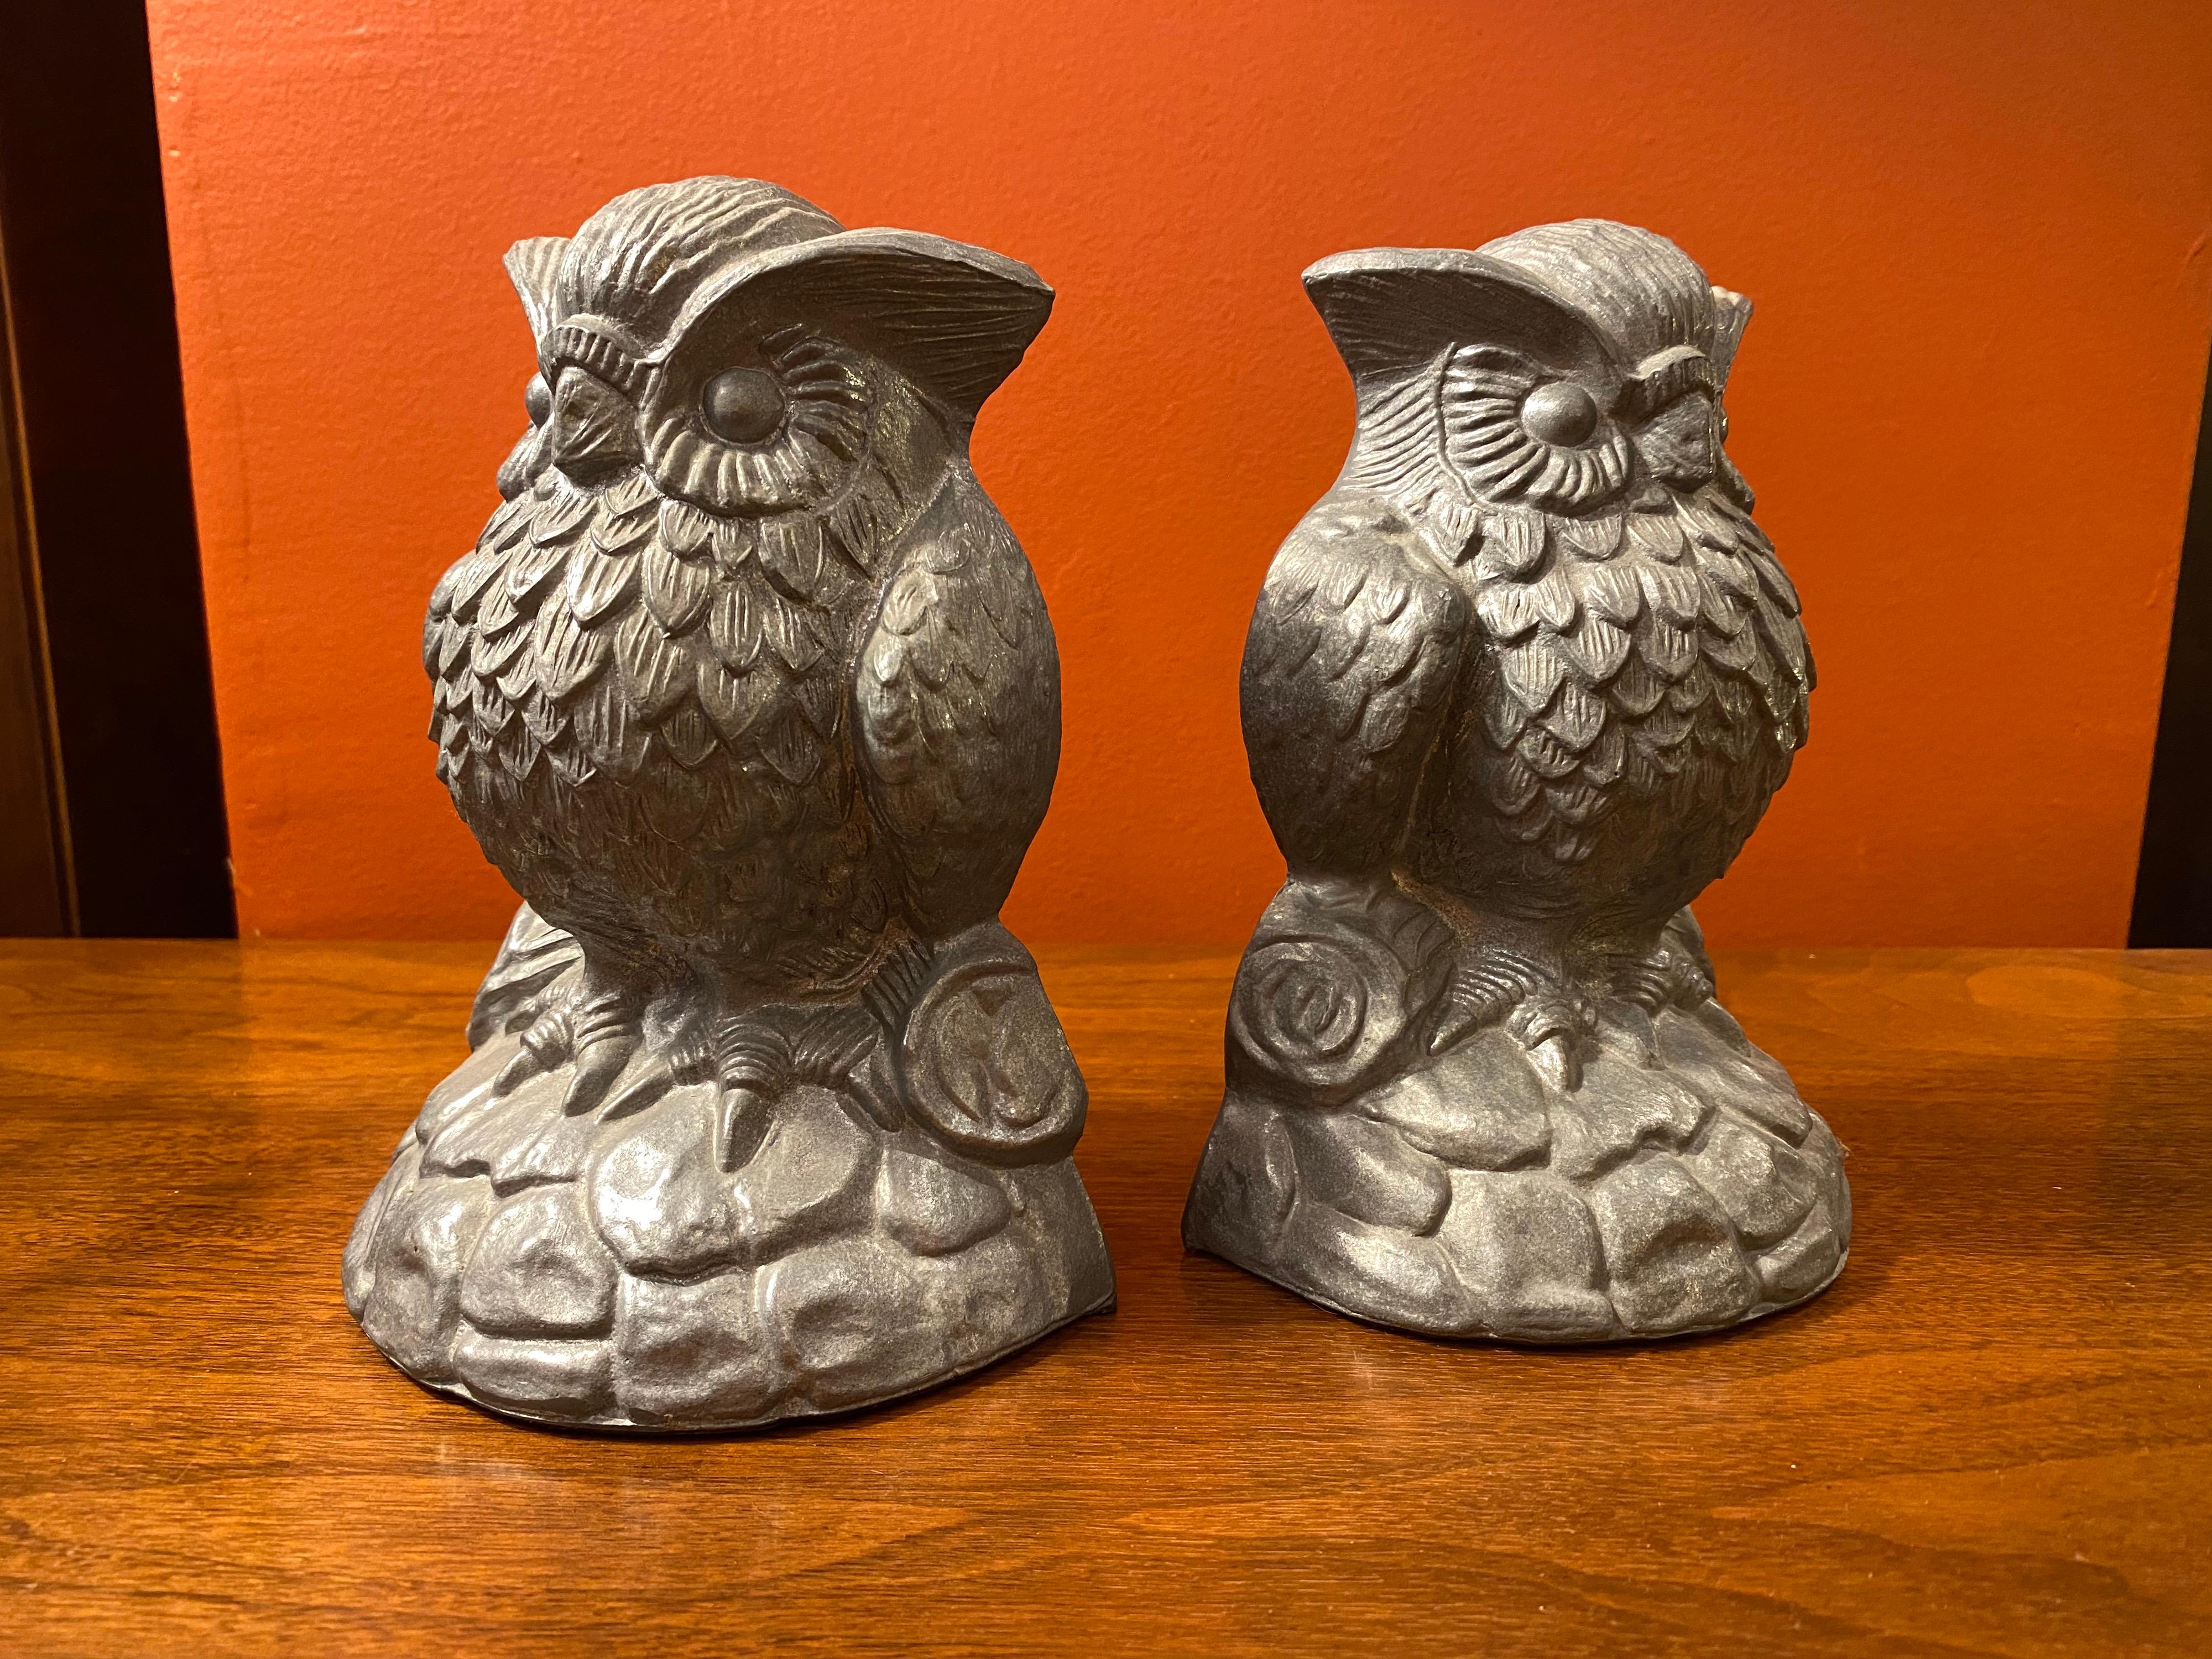 Aluminum Owl bookends, weighted cast aluminum. Nice Image and useful!